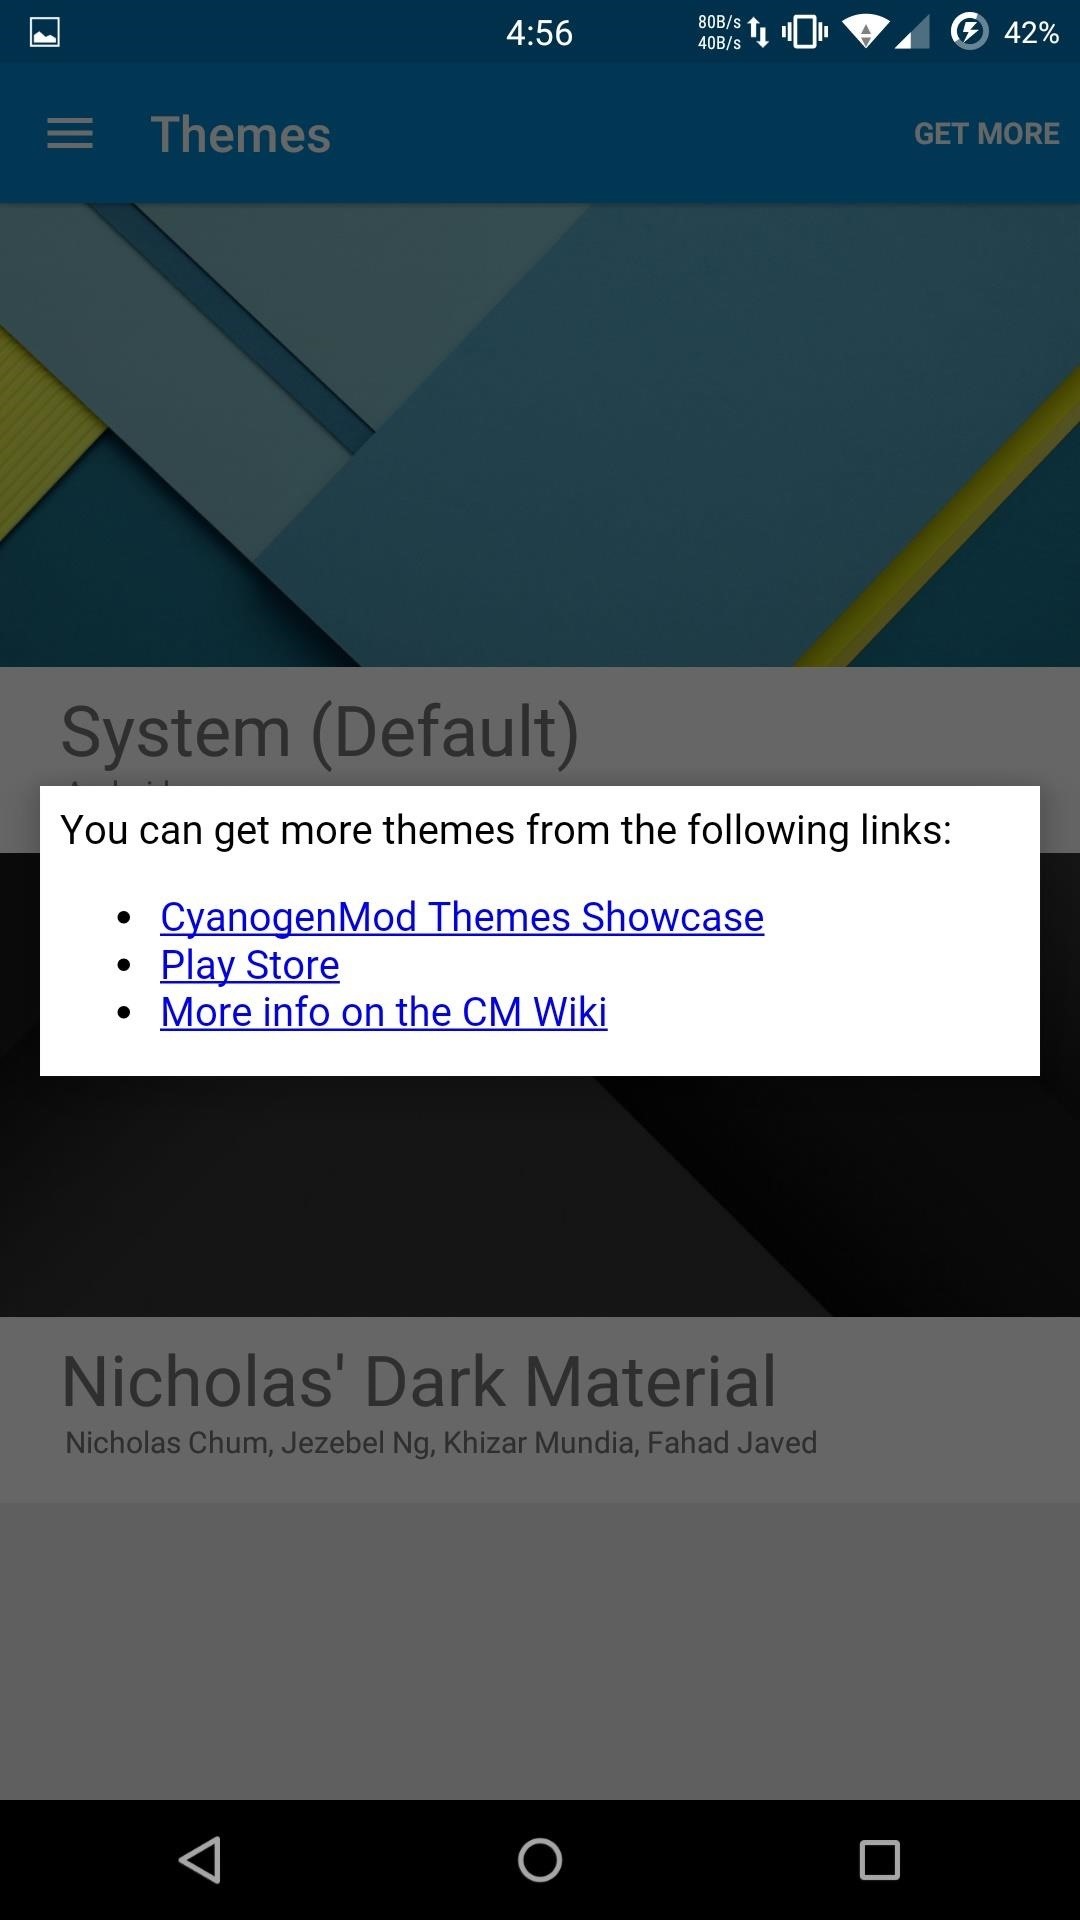 Get Early Access to CyanogenMod 12's Theme Engine on Your OnePlus One